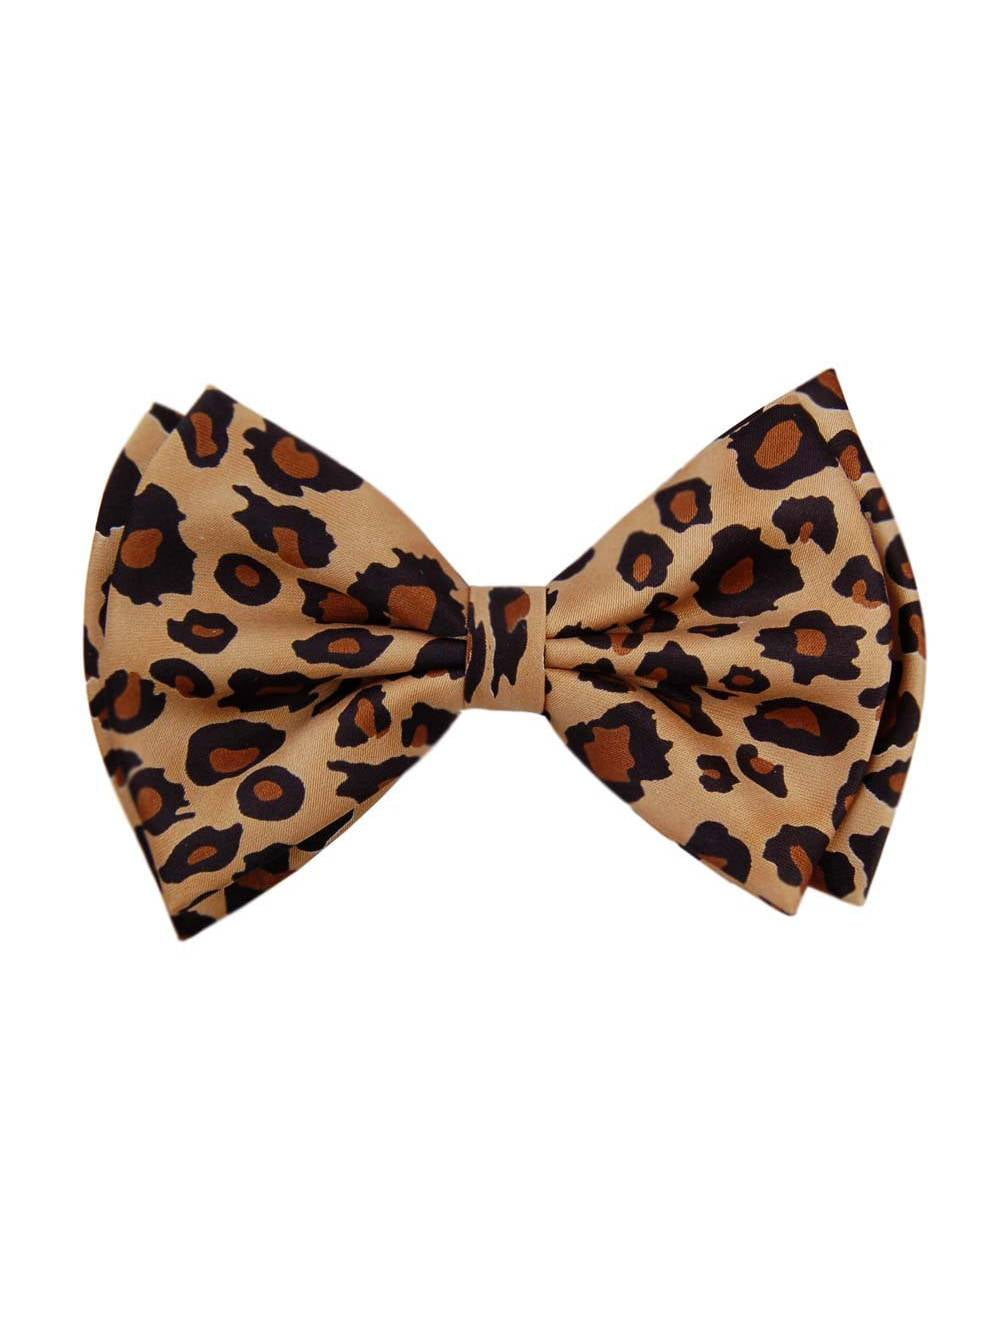 Pre-tied Bow Tie in Gift Box- Leopard Print 